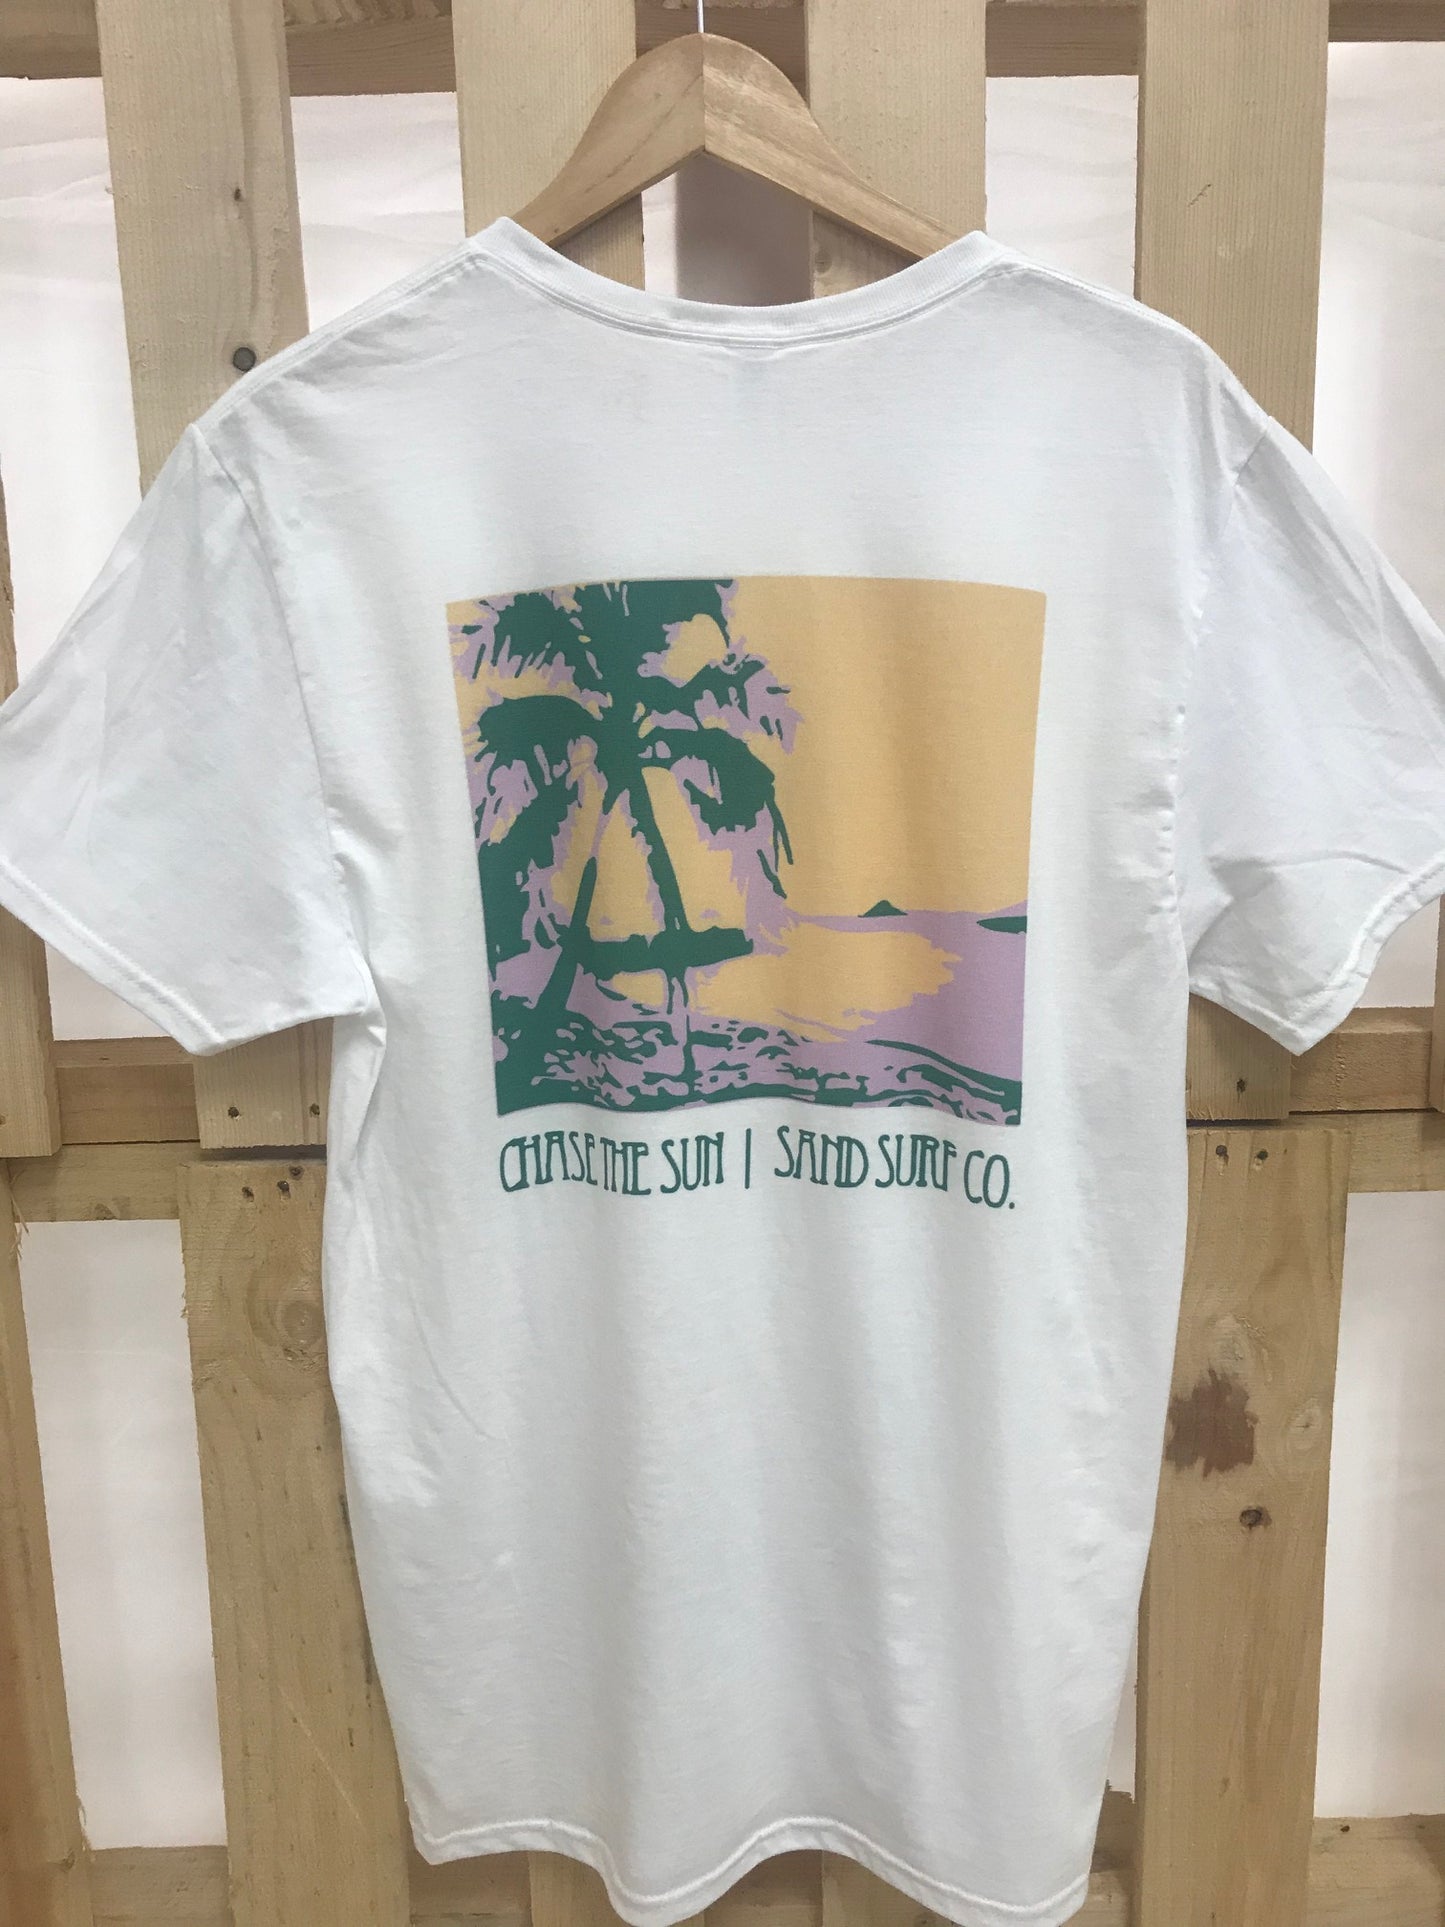 Sand Surf Co. Official Shop Tee